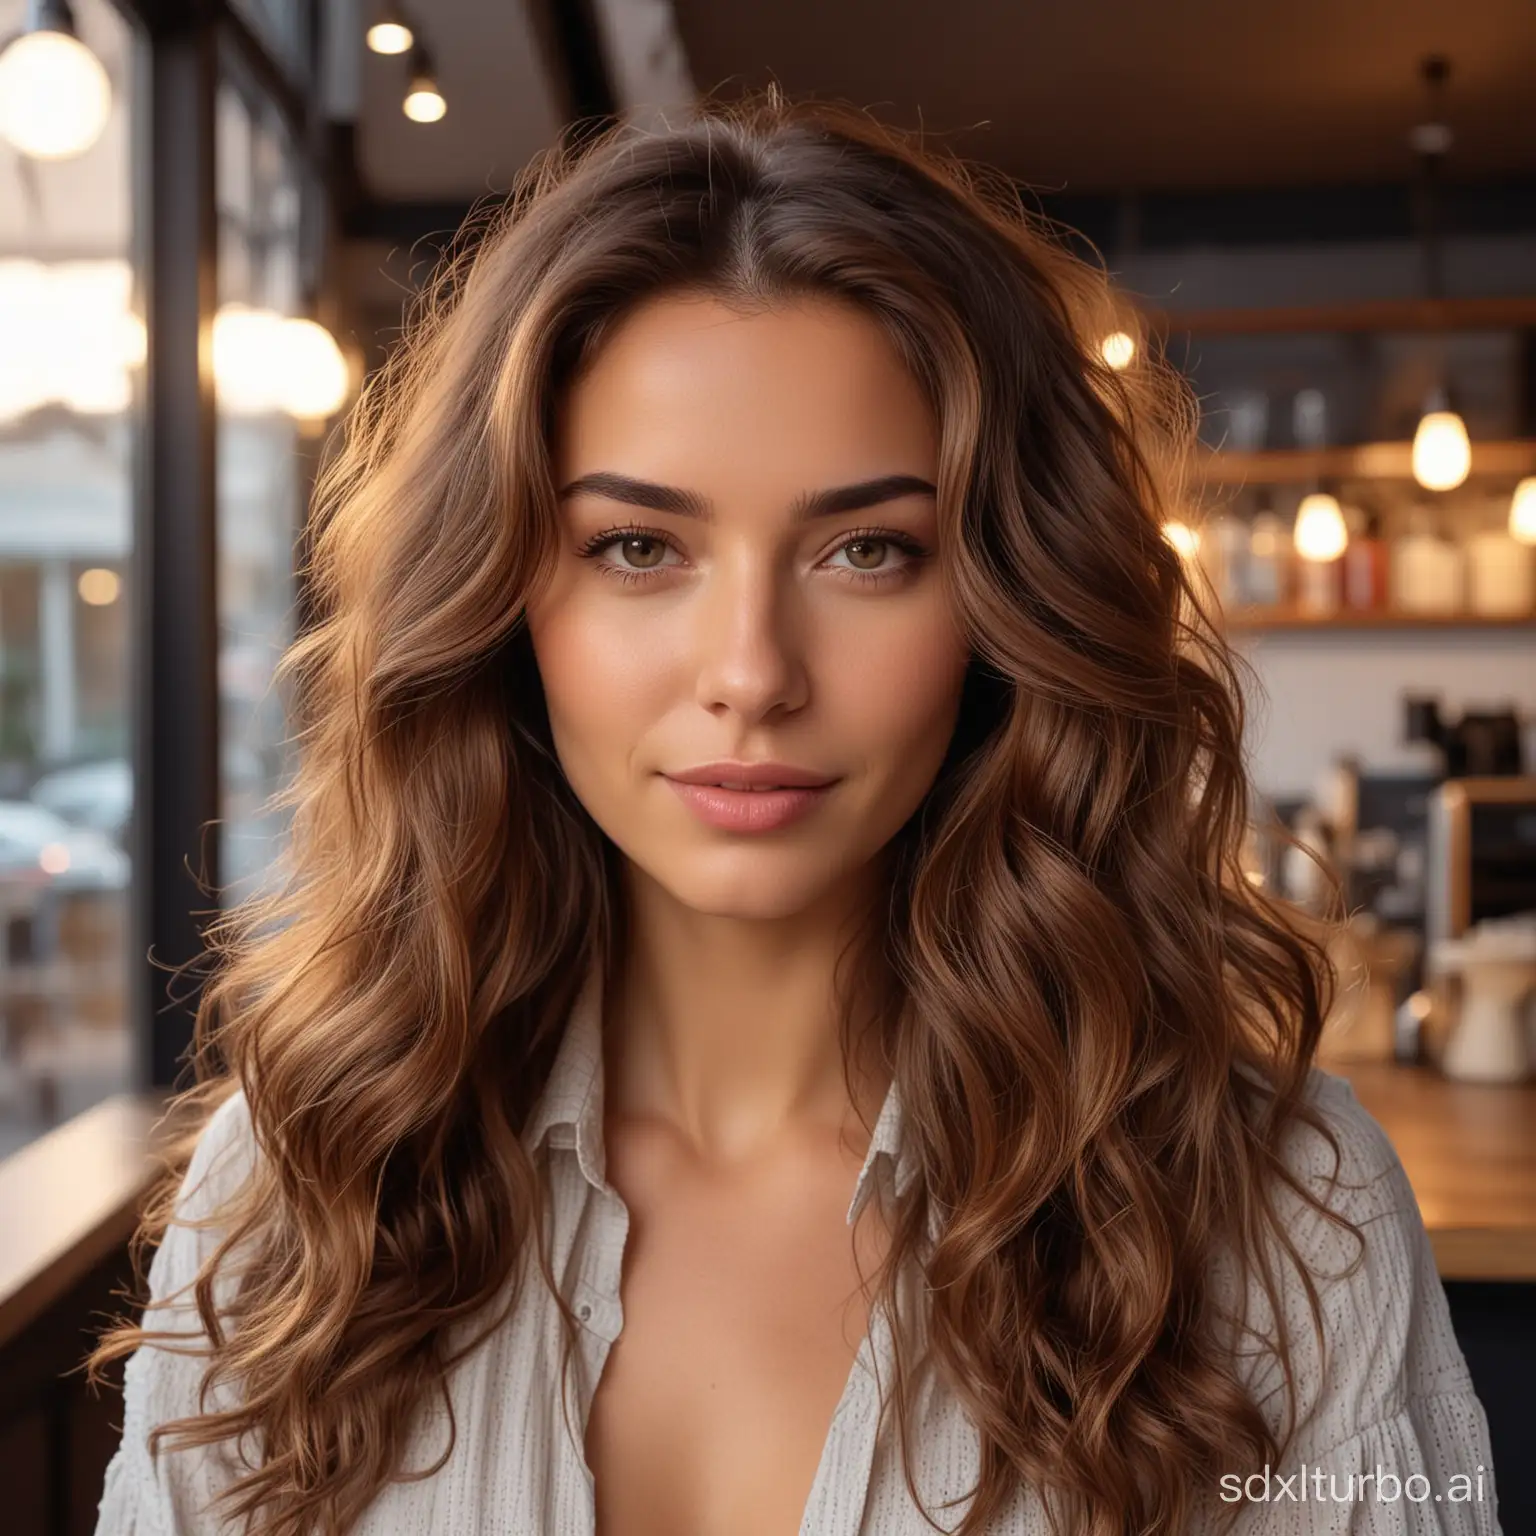 Front view portrait of Gorgeous woman, wavy brown hair, masterpiece, coffee shop, dusk hour, high quality 8k